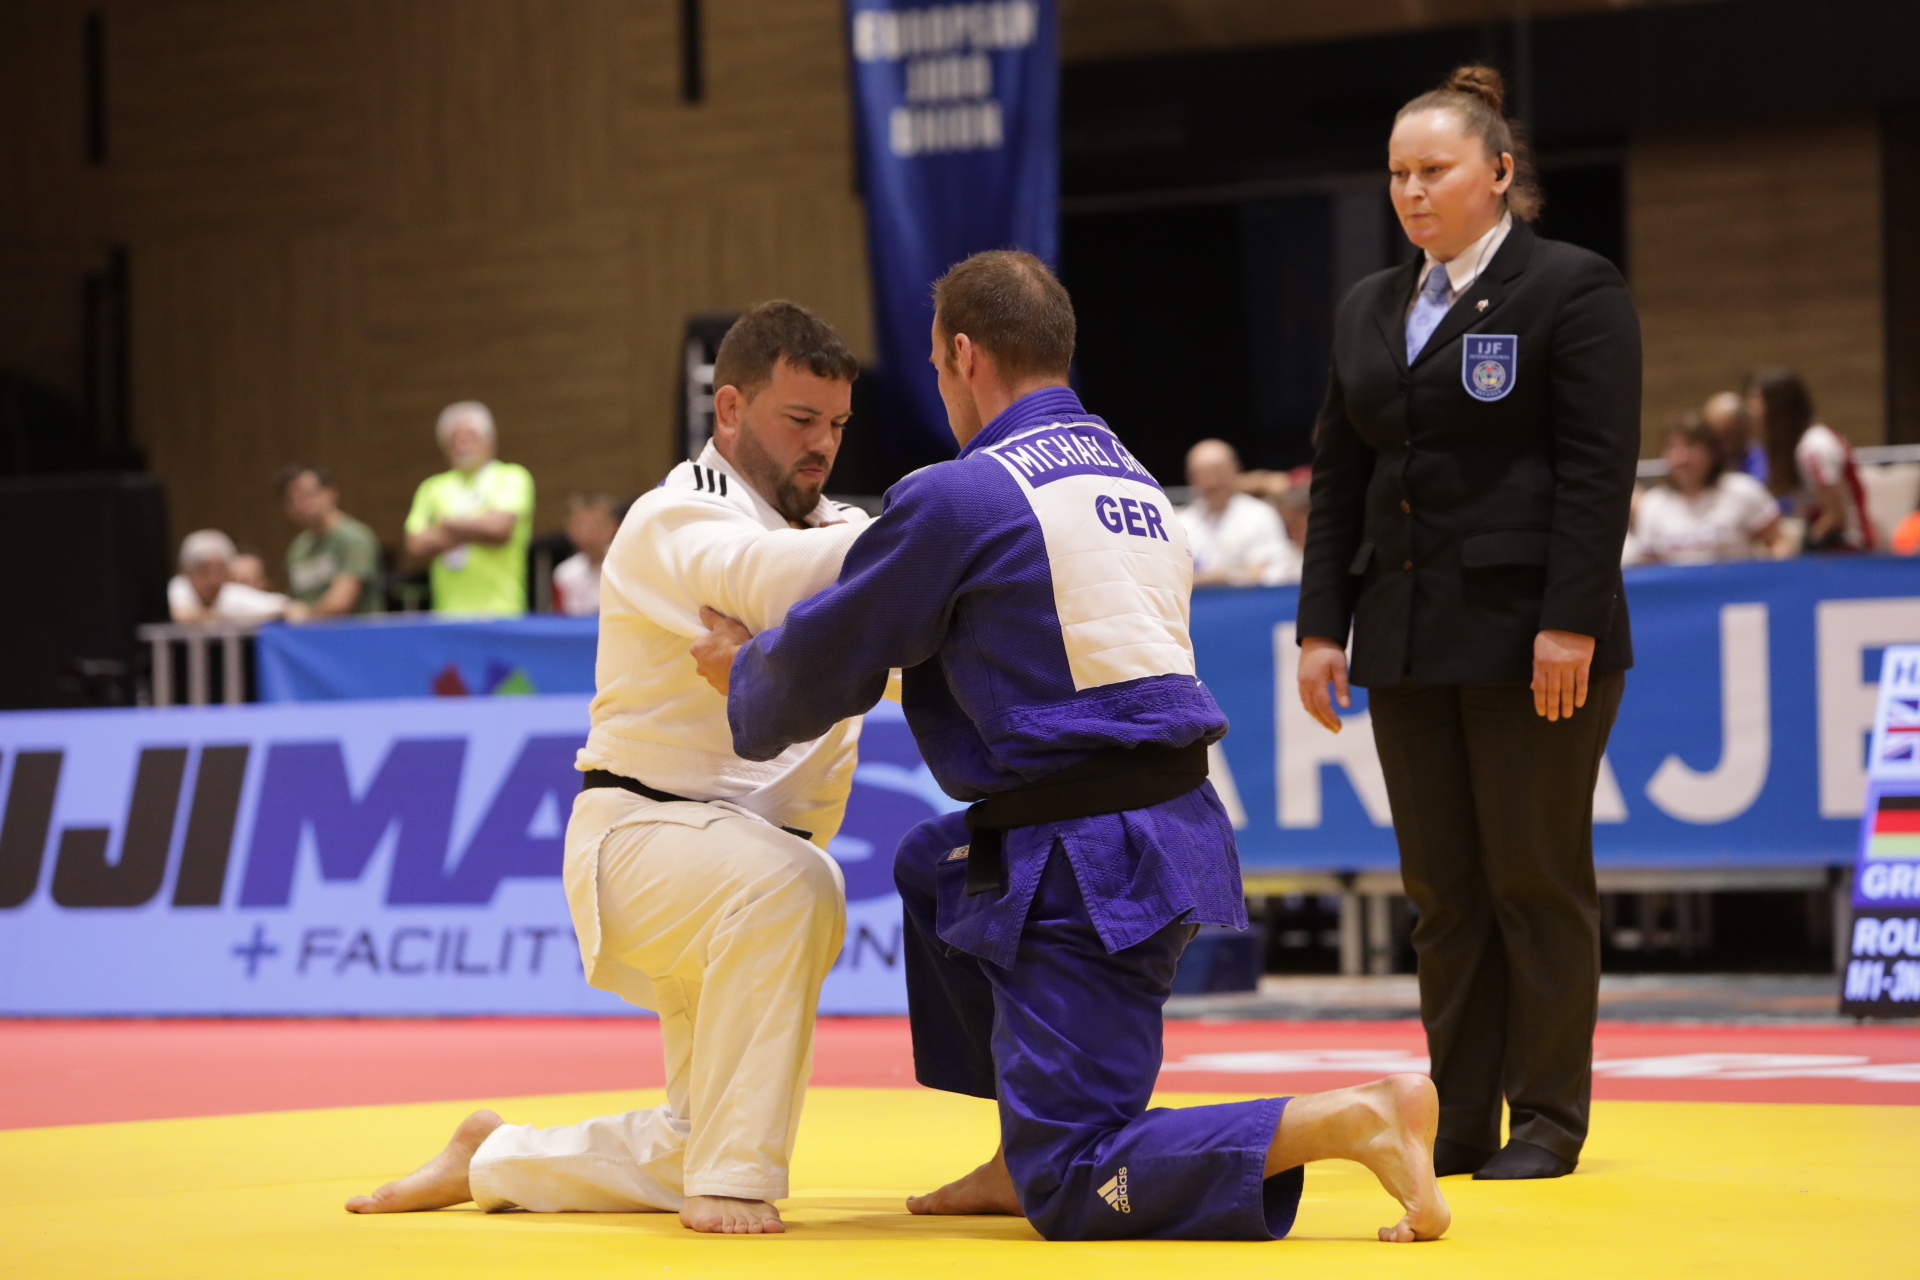 A HISTORIC MOMENT FOR JUDO 